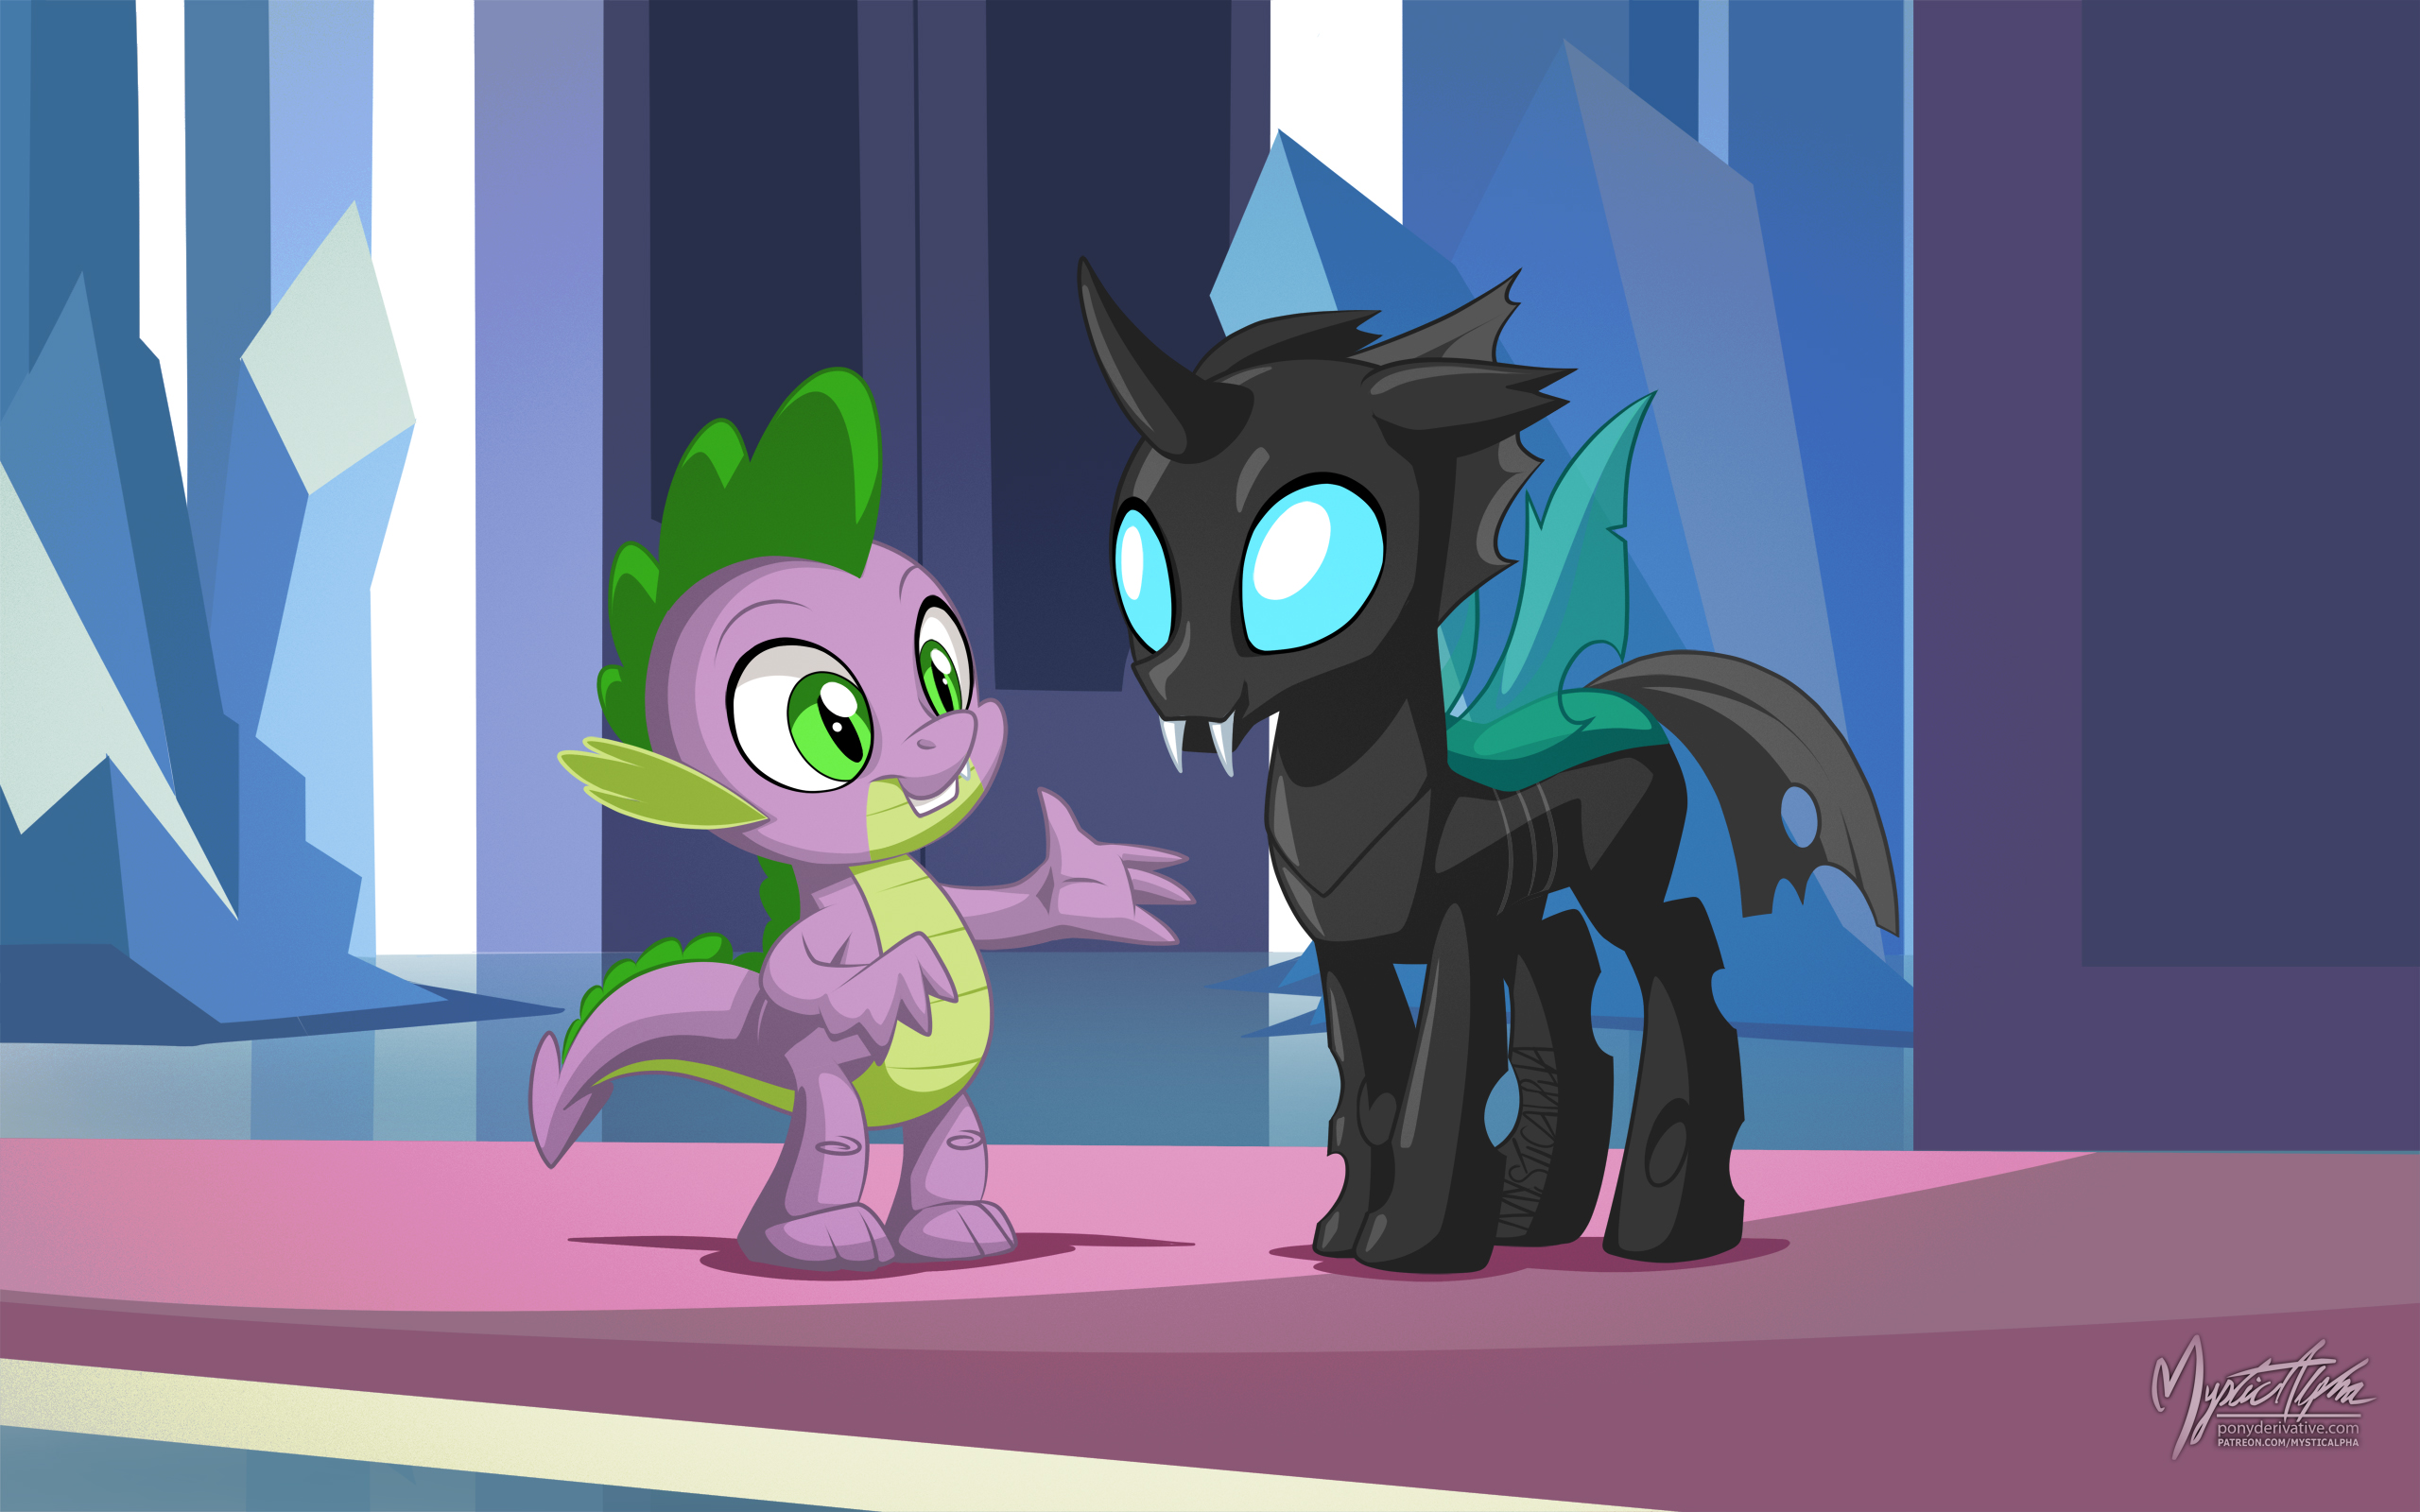 Spike and Thorax